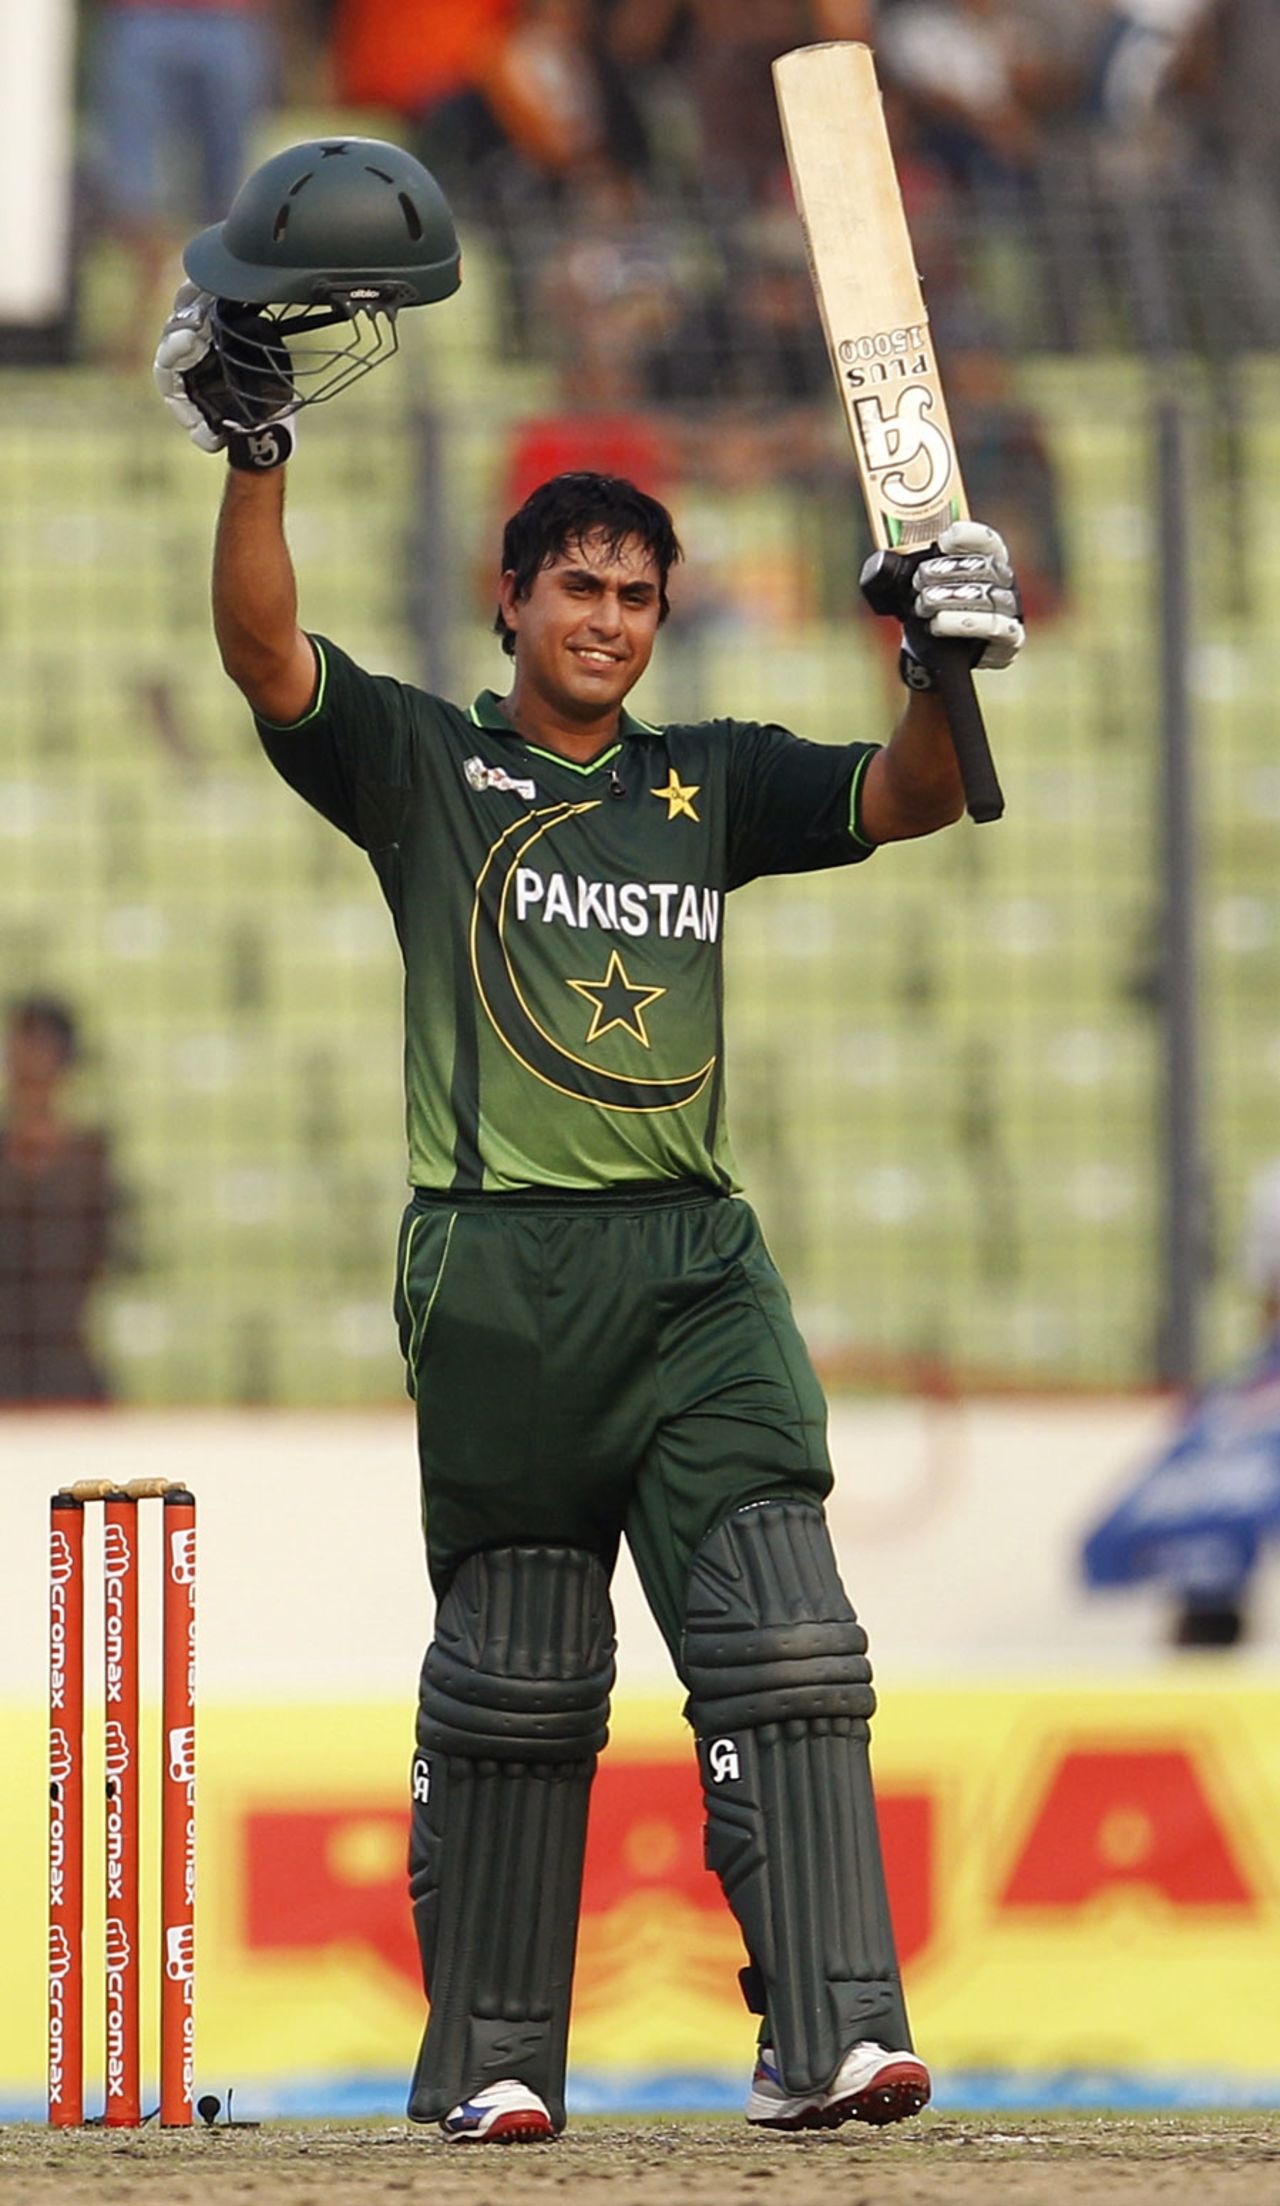 Nasir Jamshed celebrates his first ODI century, India v Pakistan, Asia Cup, Mirpur, March 18, 2012